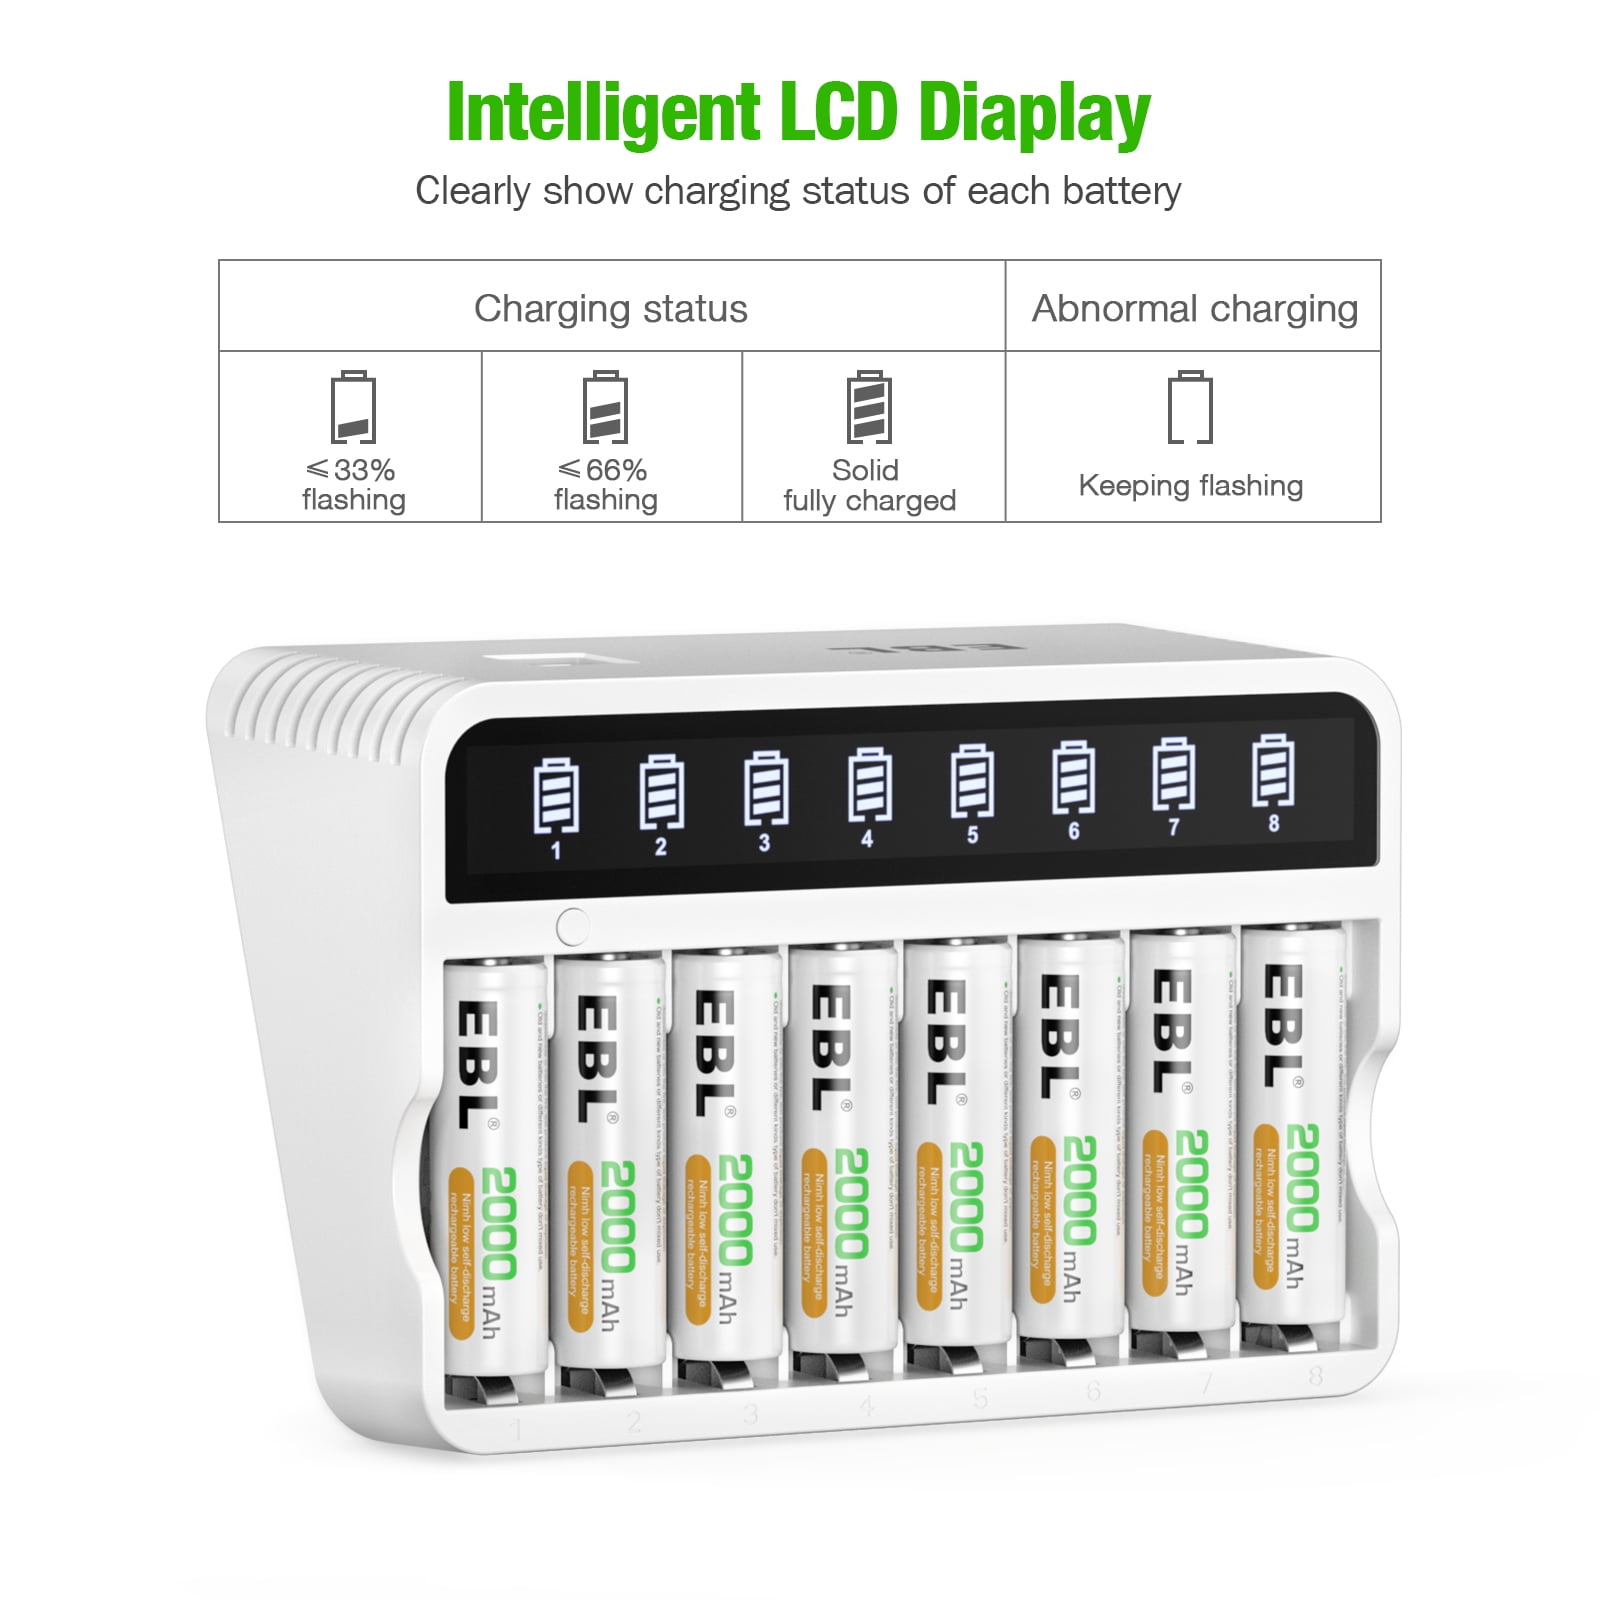 LCD Smart Battery Charger for AA AAA NiMH NiCd Rechargeable Batteries with 2.4A USB Output Port and AC Cable EBL 12 Bays AA AAA Battery Charger with Discharge Function 